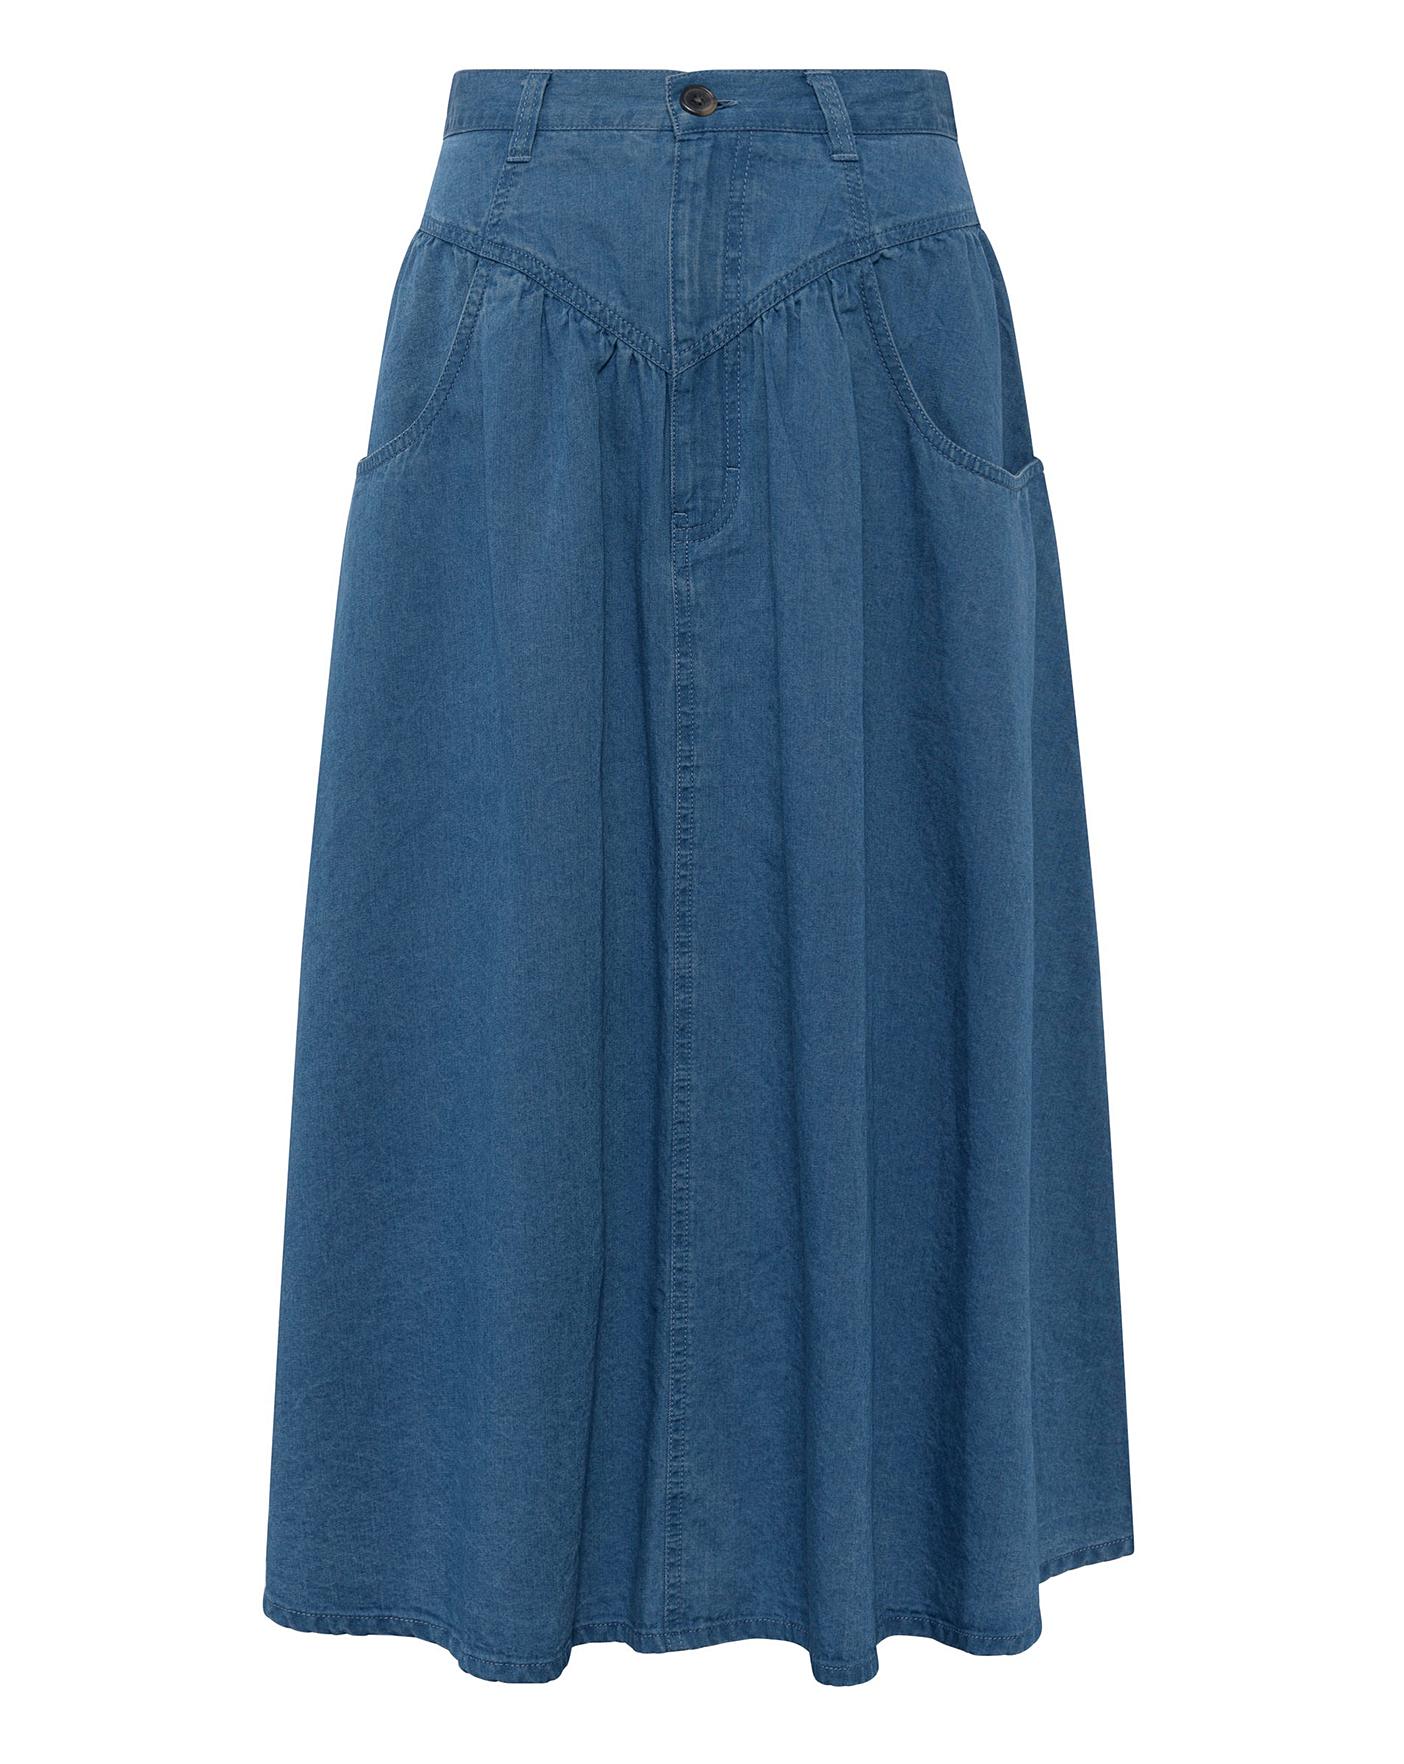 French Connection Chambray Denim Skirt | J D Williams